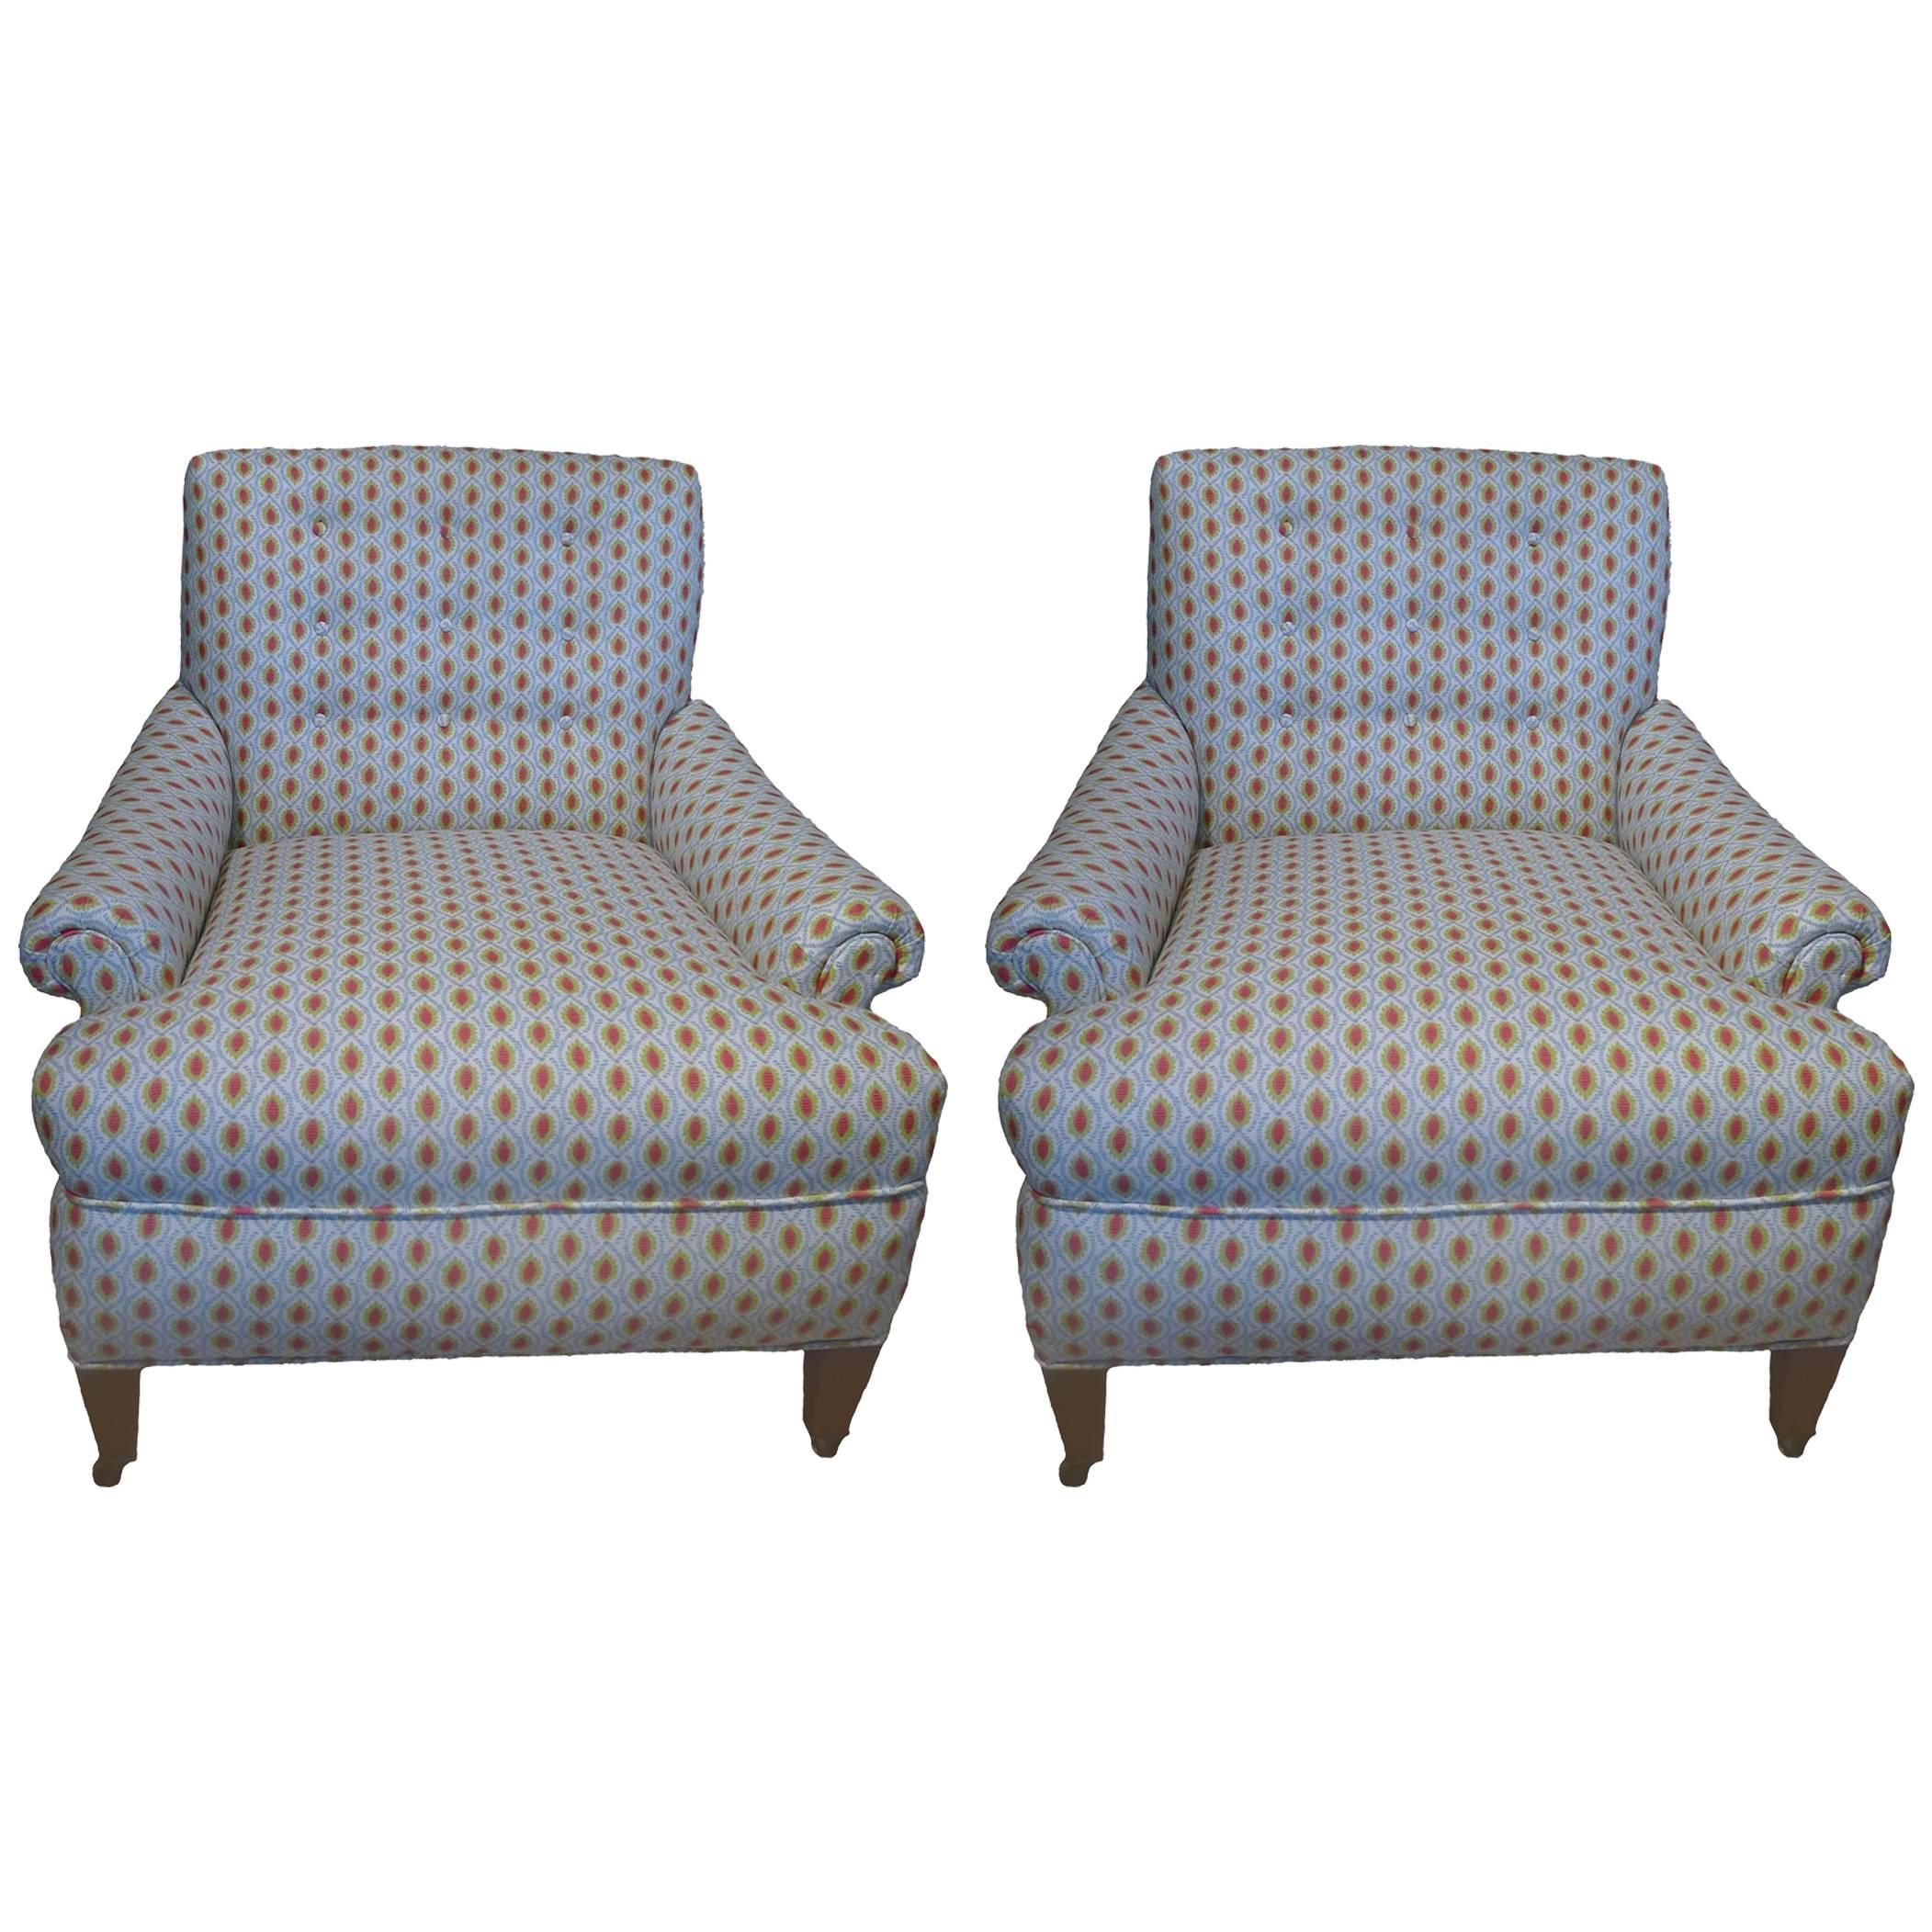 Pair of 1940s Club Chairs